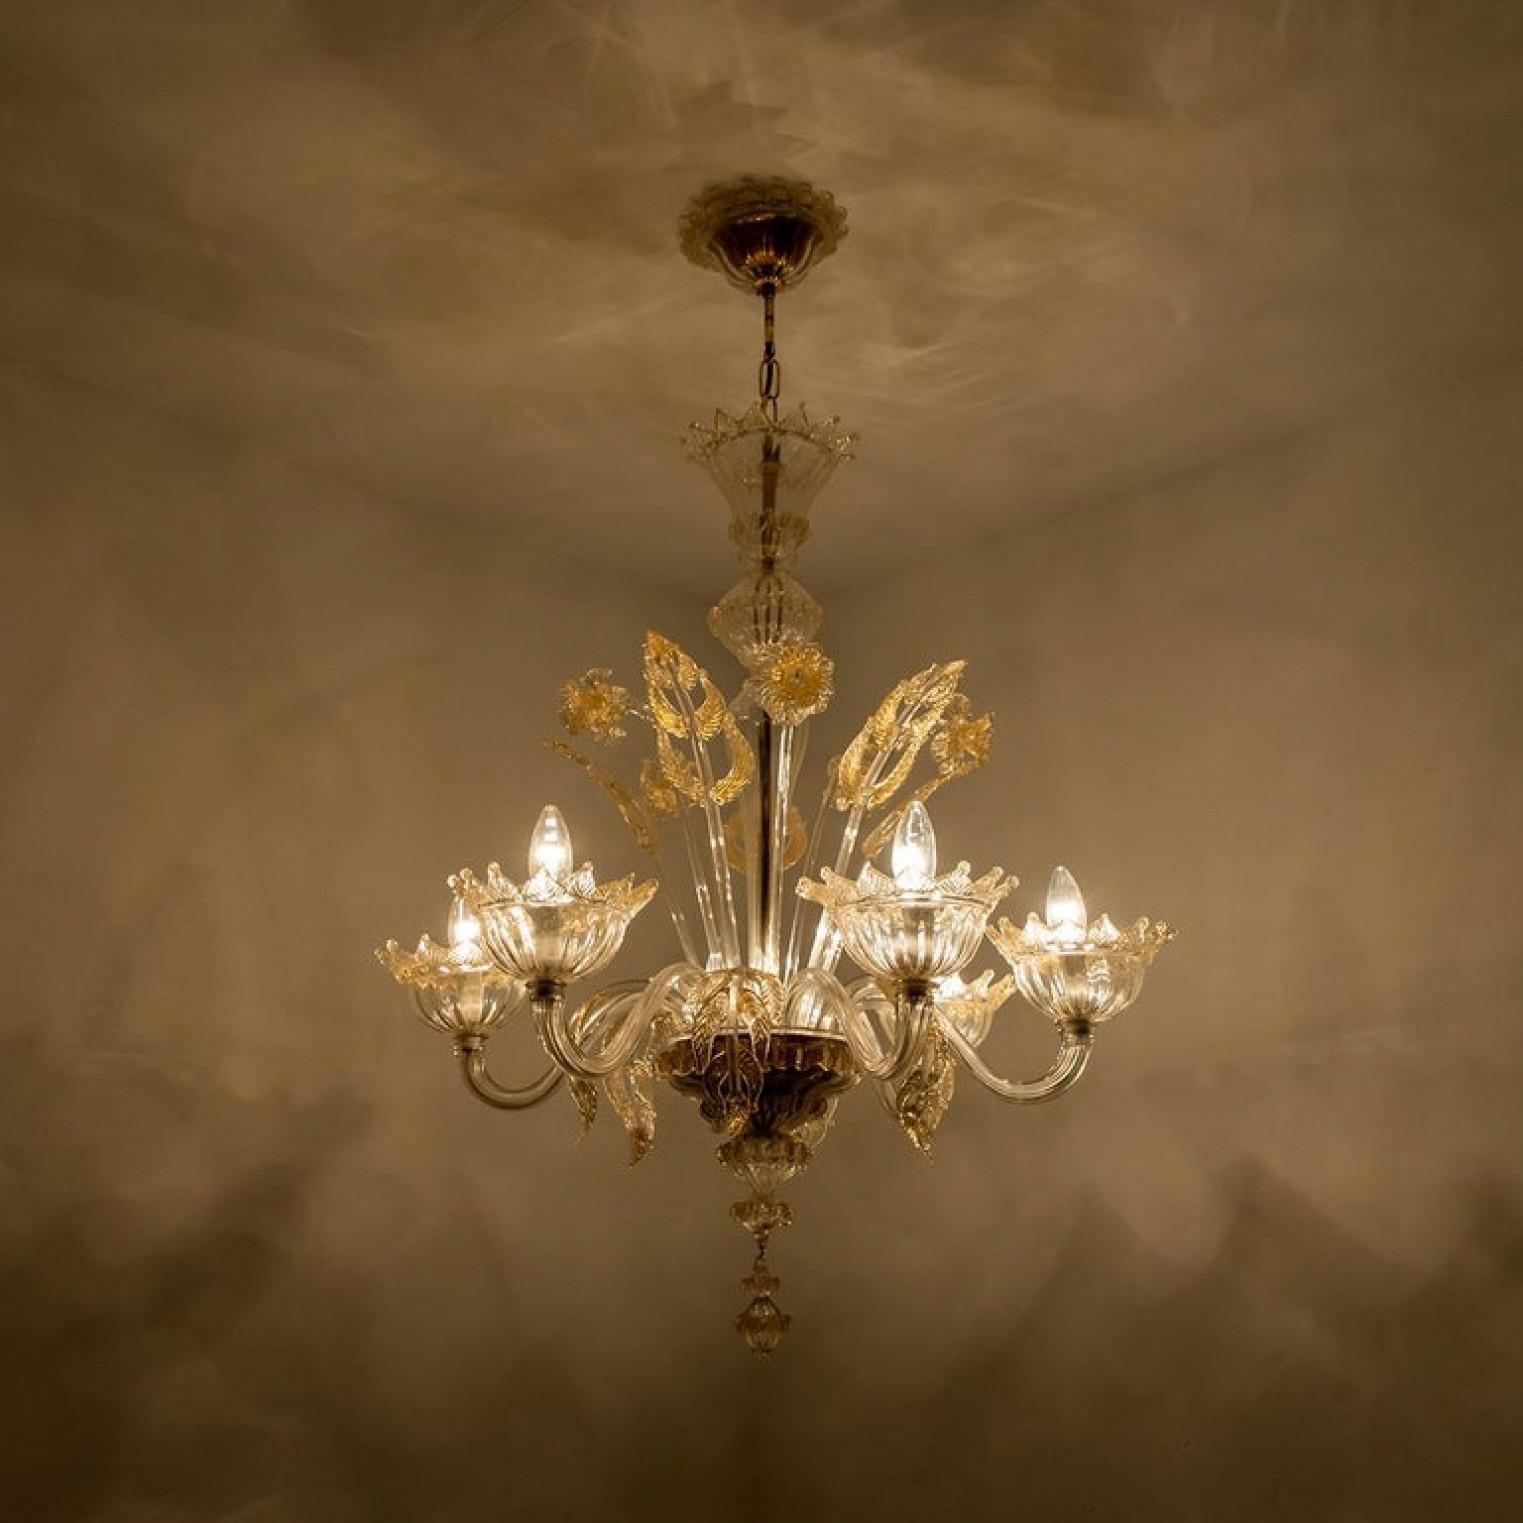 Large Venetian Chandelier in Gilded Murano Glass, by Barovier, 1950s For Sale 10